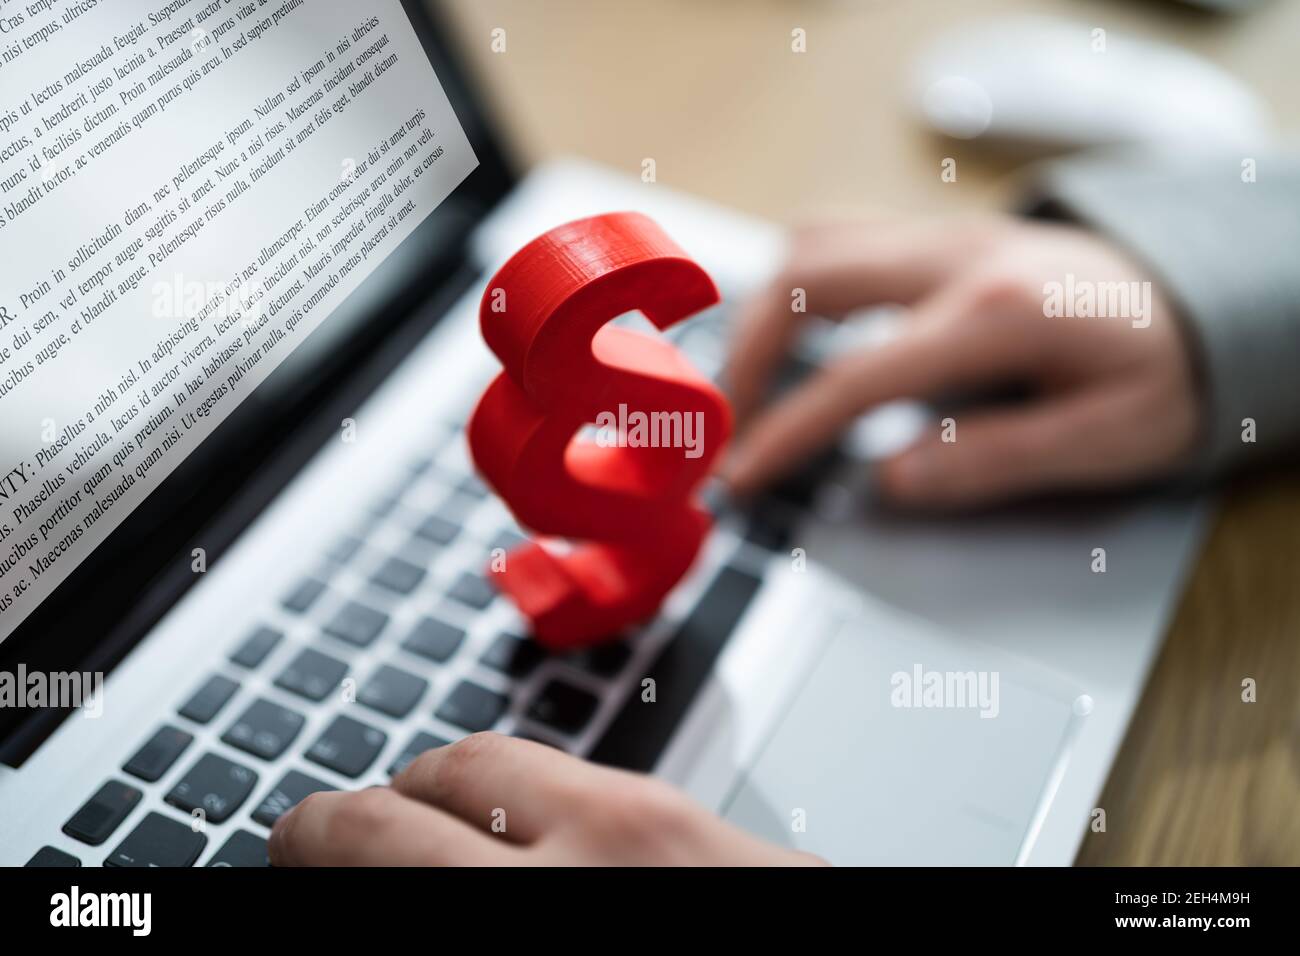 Paragraph Court Law Tech On Computer. Legal And Law Stock Photo